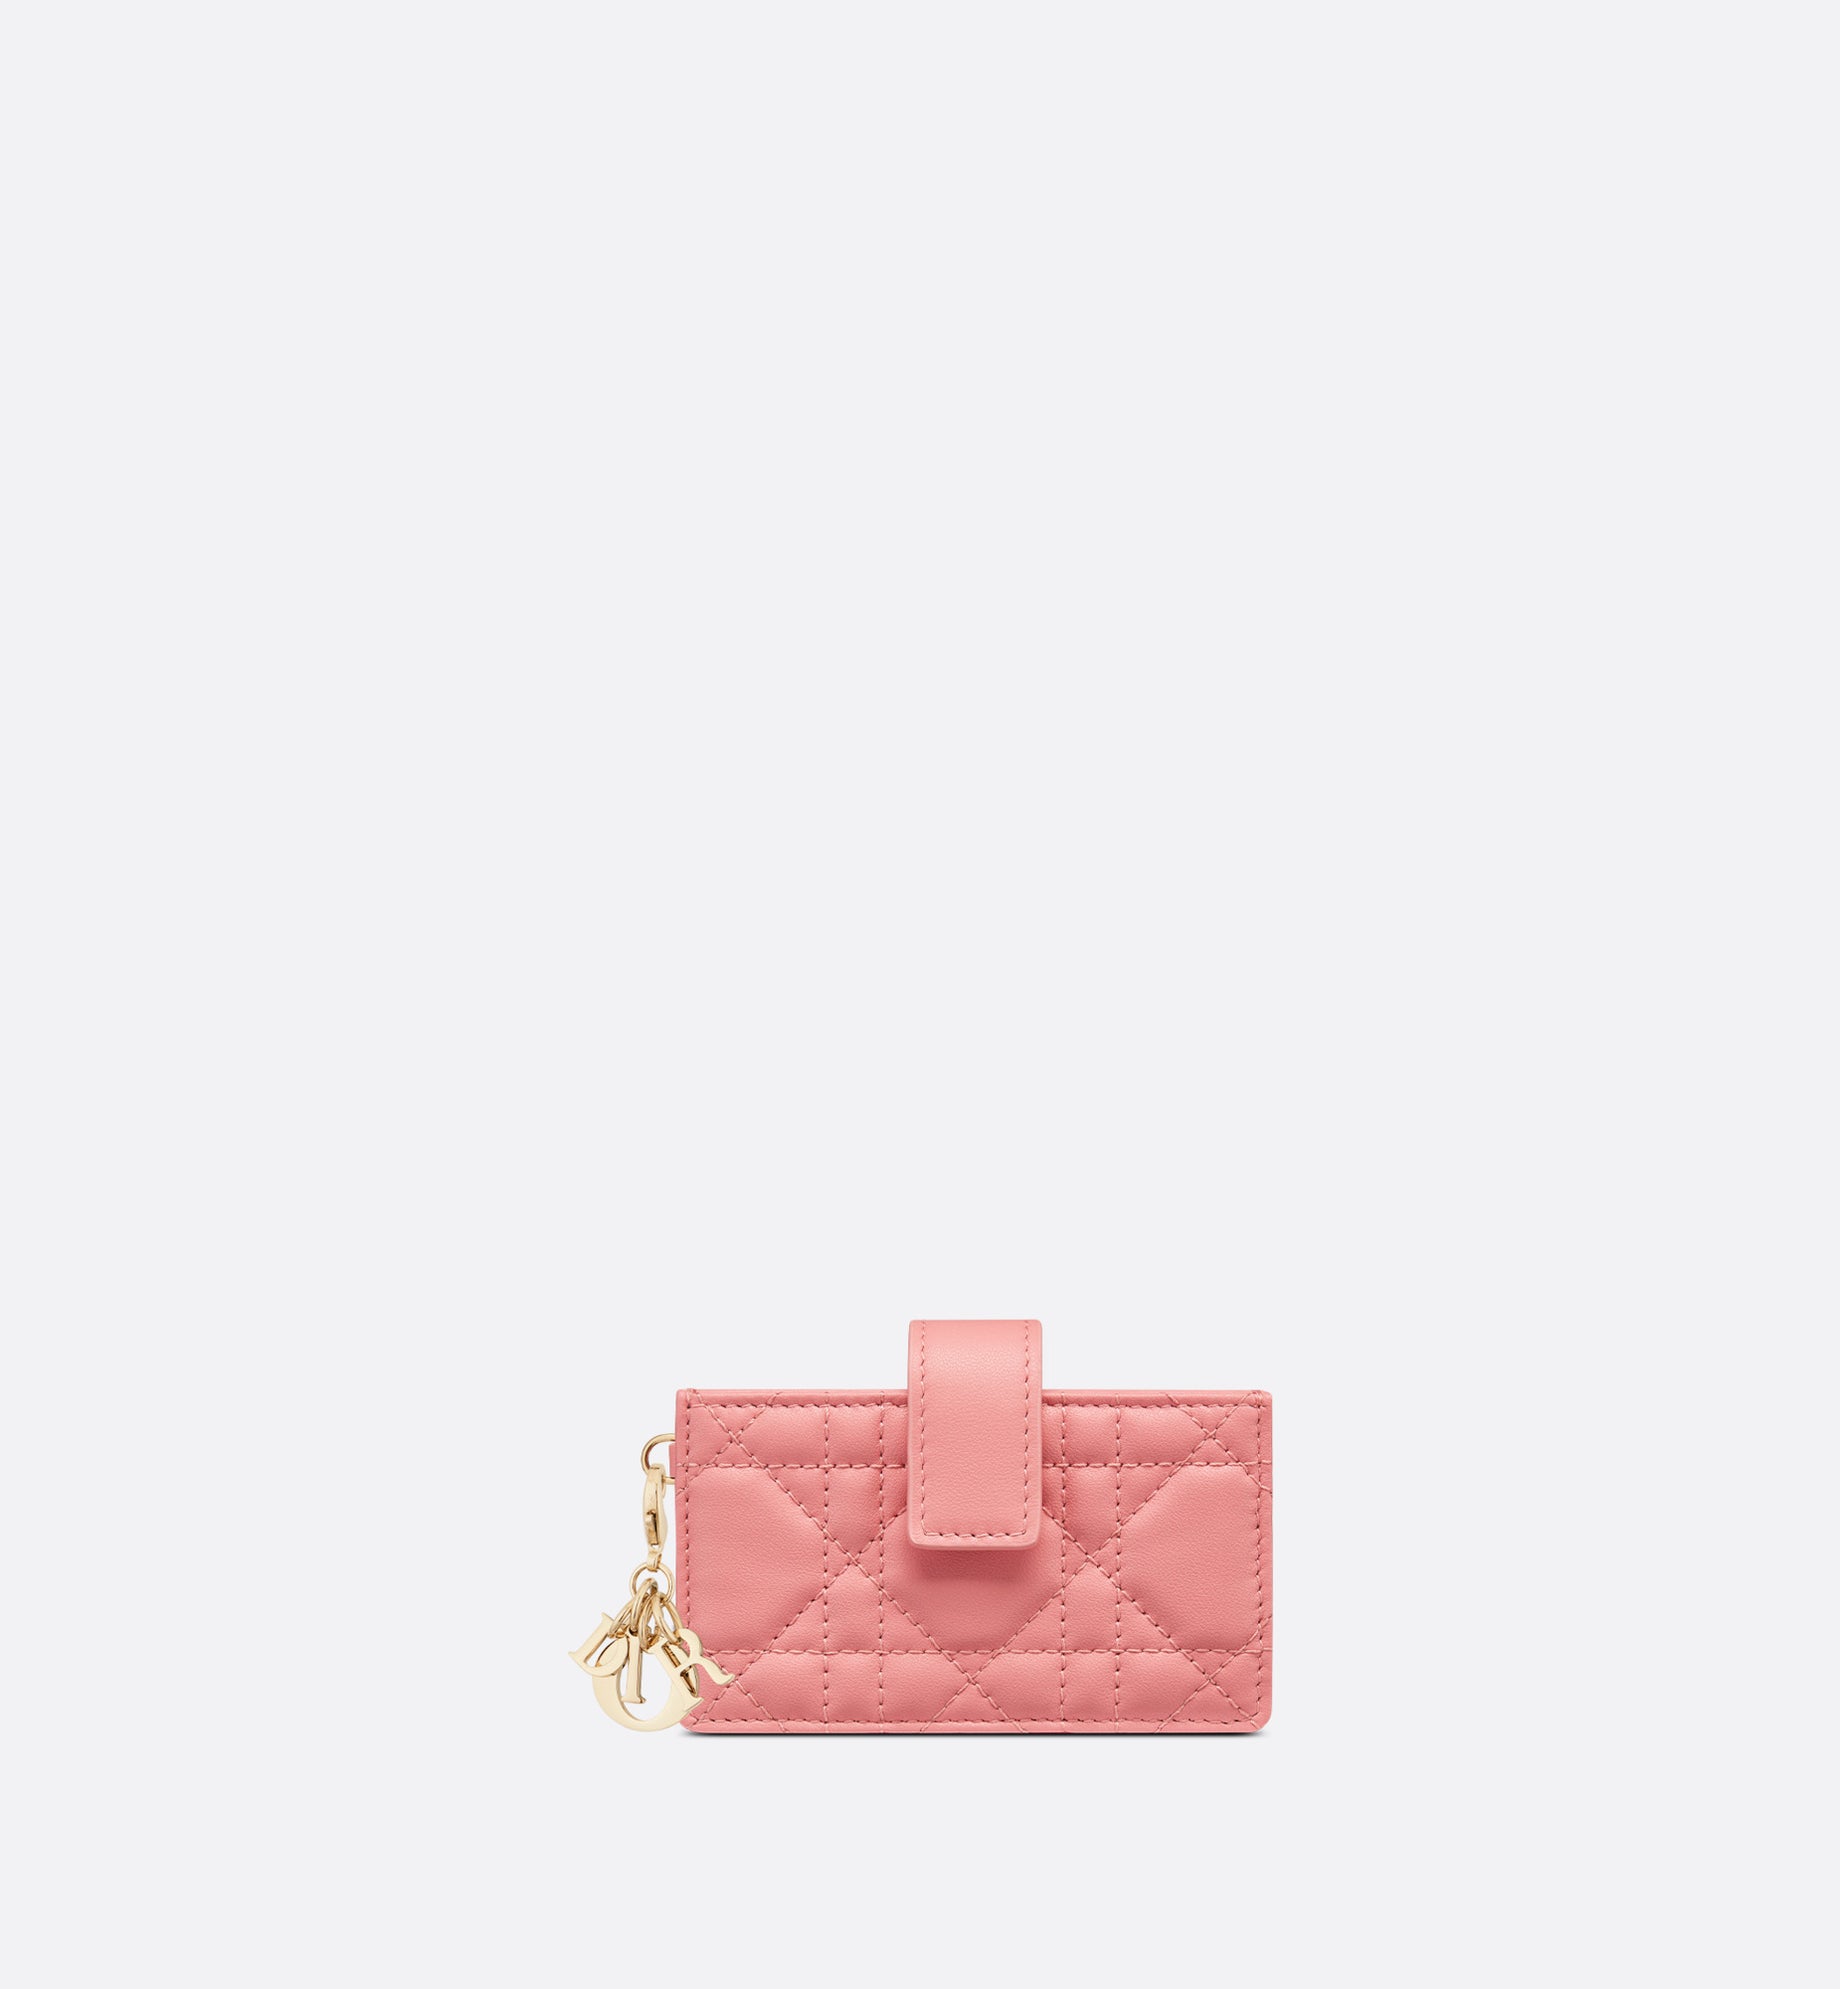 Lady Dior 5-Gusset Card Holder • Light Pink Cannage Lambskin